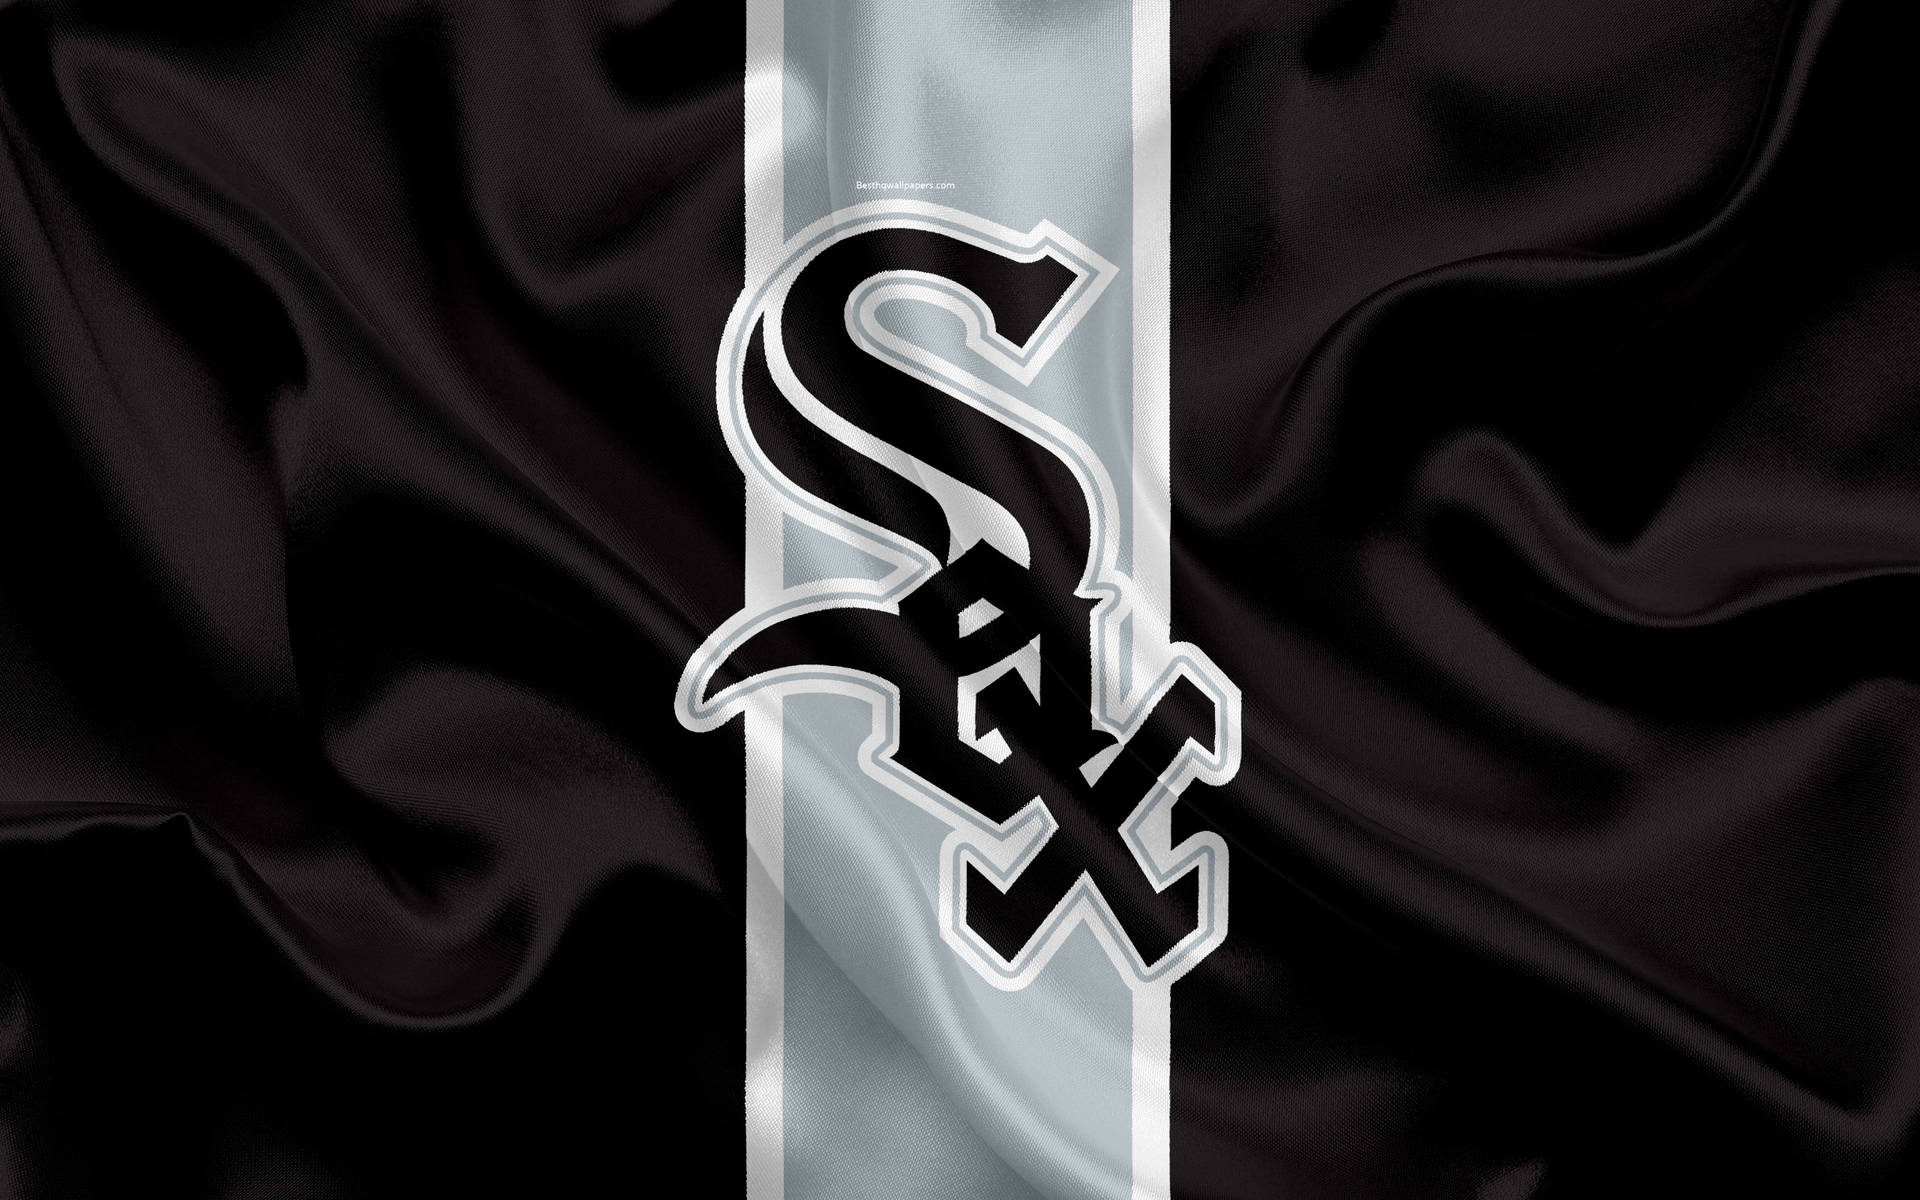 2560X1600 Chicago White Sox Wallpaper and Background